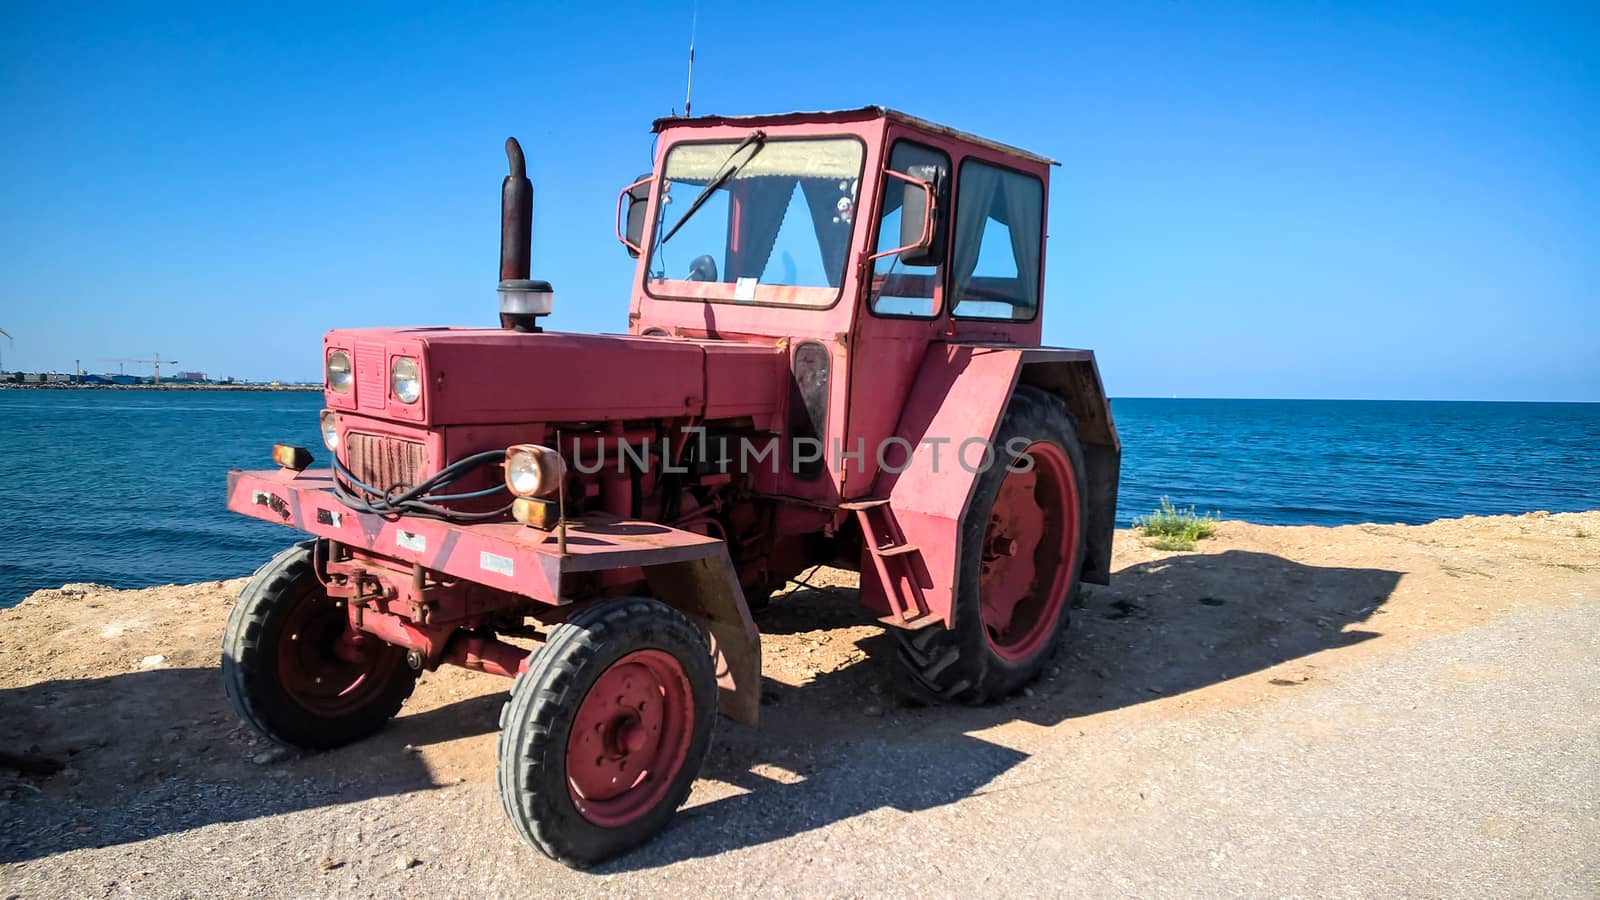 Image that captures a tractor placed near the Black Sea